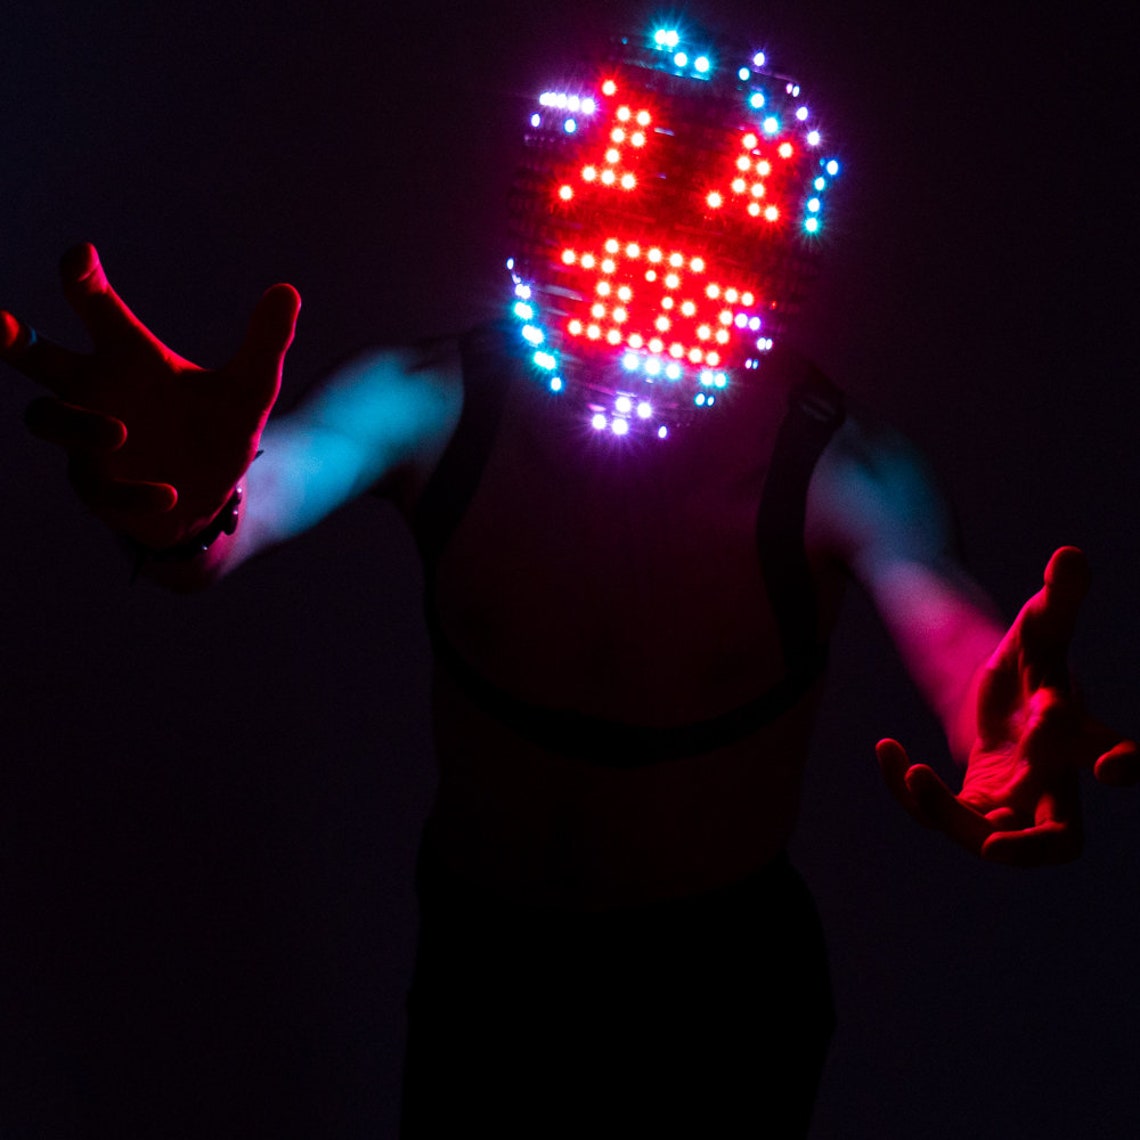 Programmable LED Full-face Mask Glowing in the Dark _H24 | Etsy Denmark